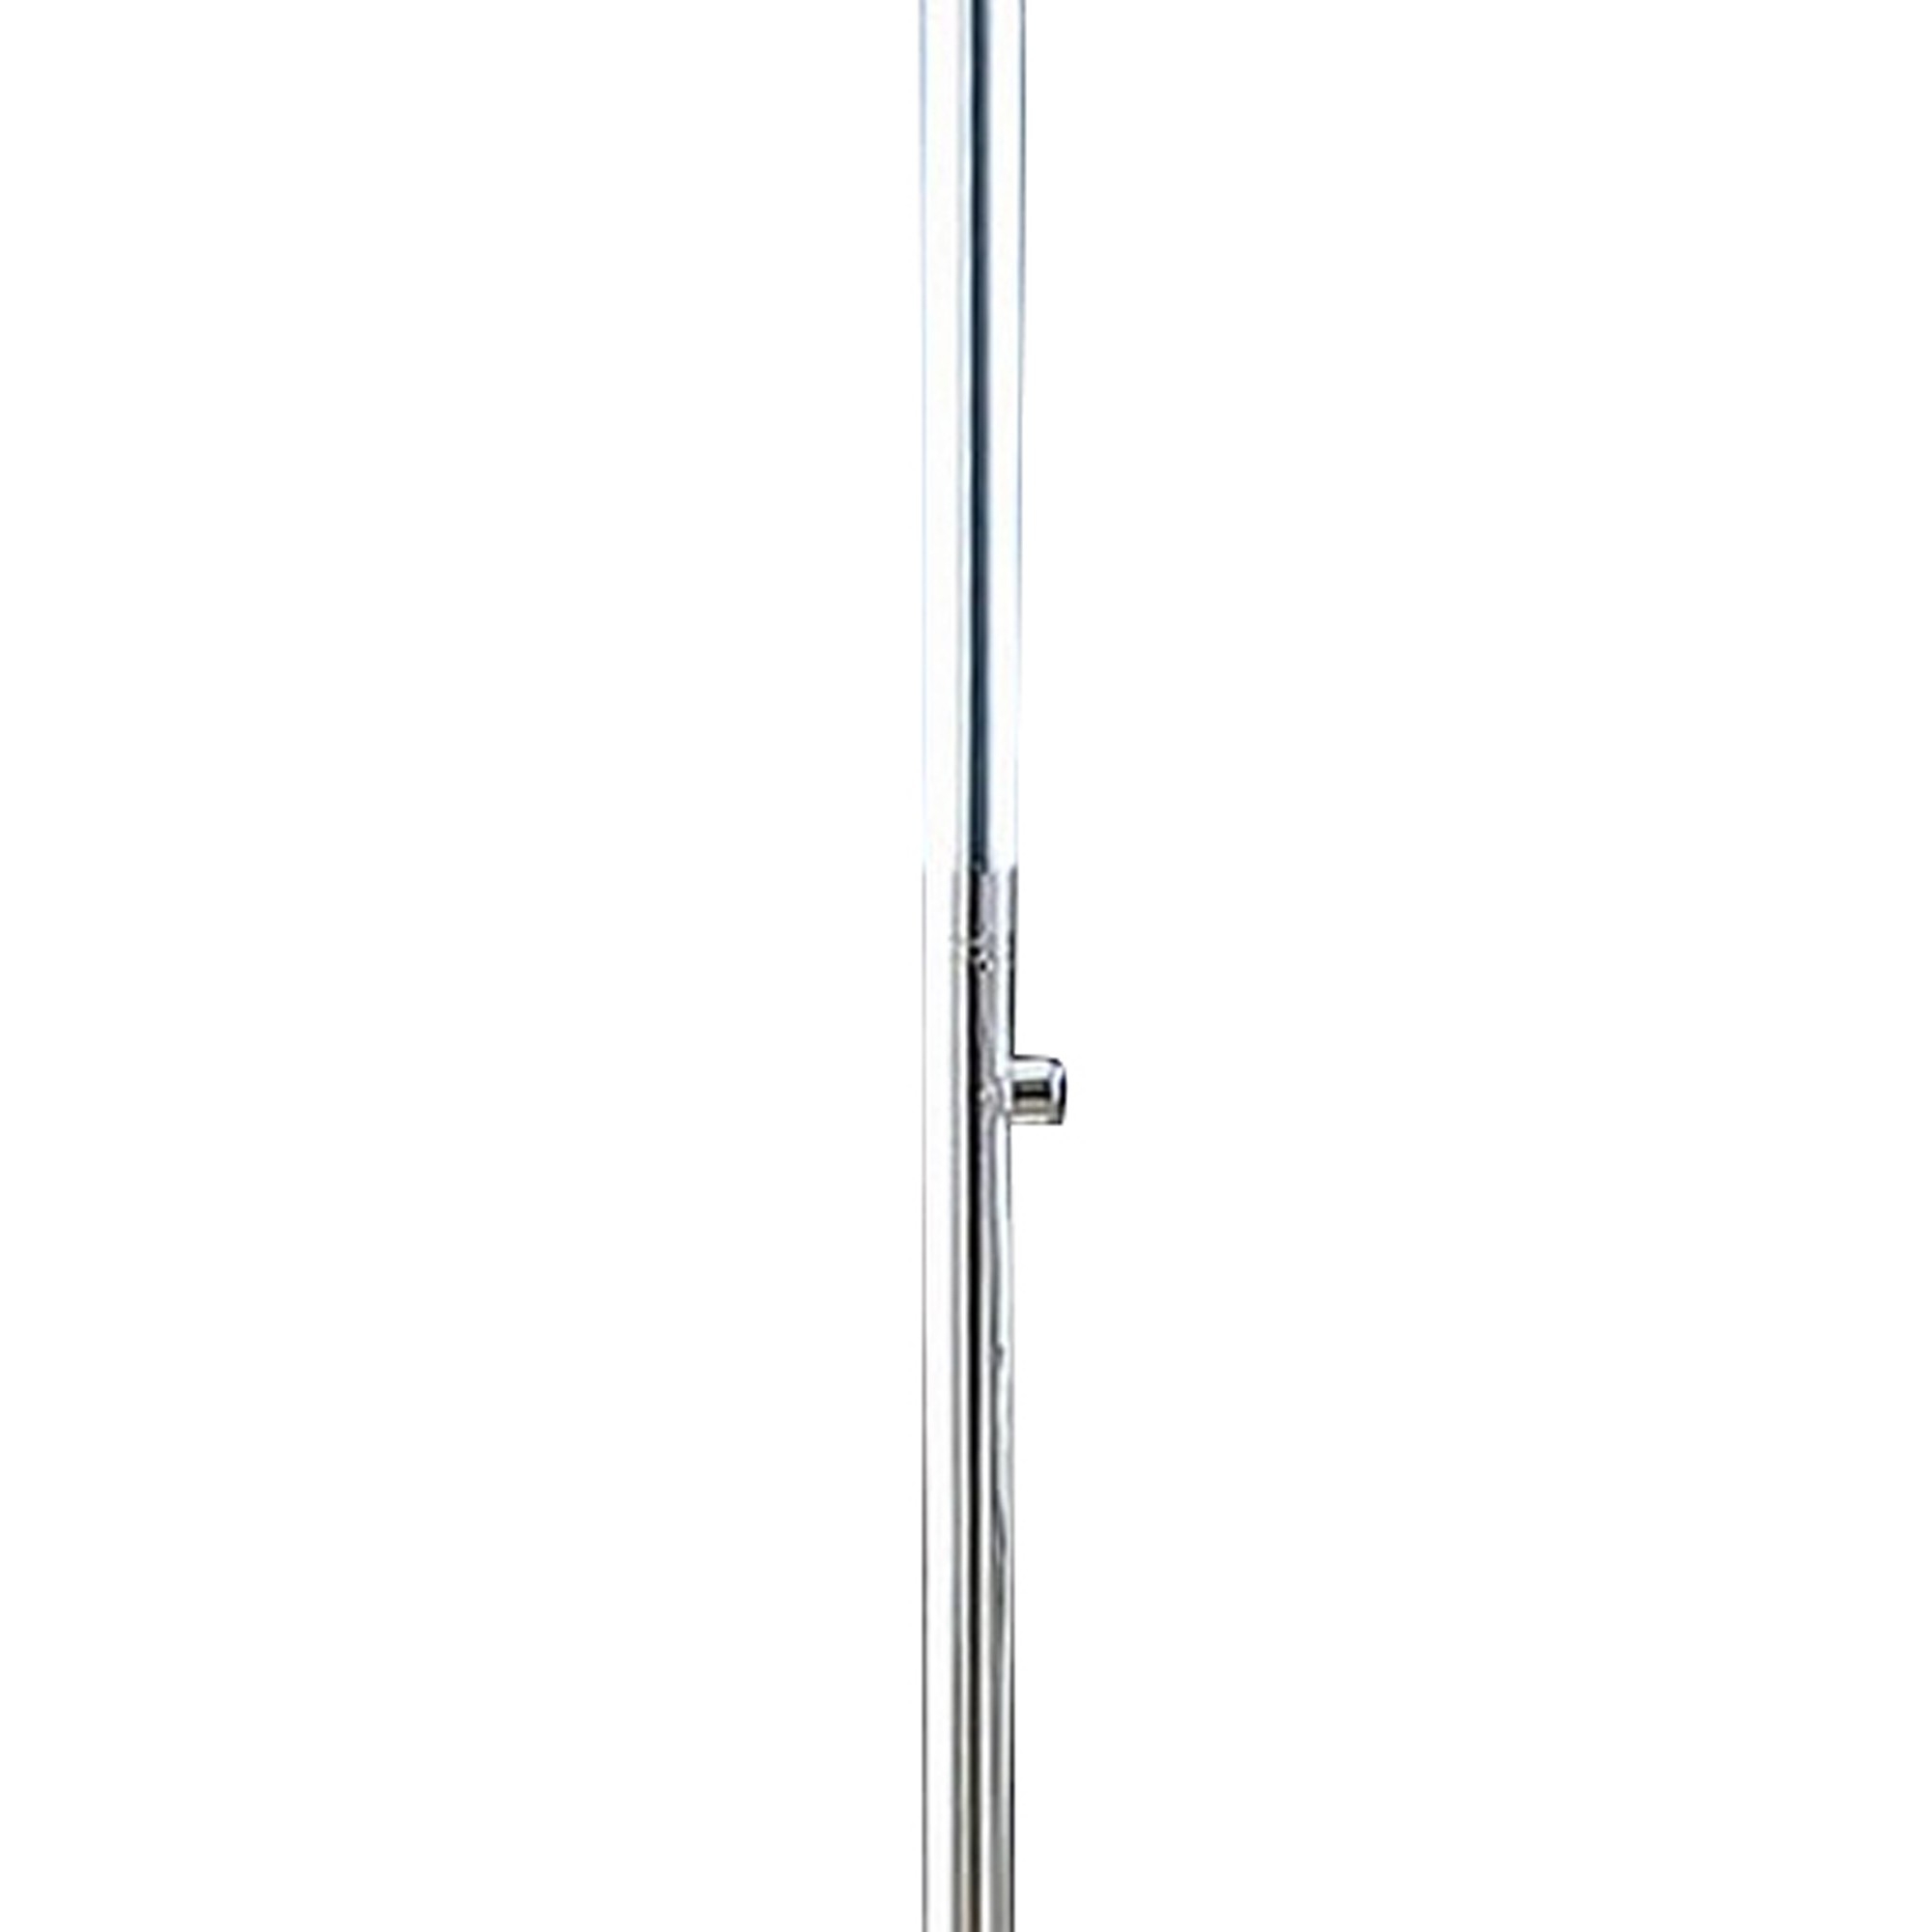 Fizo 60 Inch Floor Lamp, LED Light, Metal Base With Touch Switch, Chrome -Saltoro Sherpi